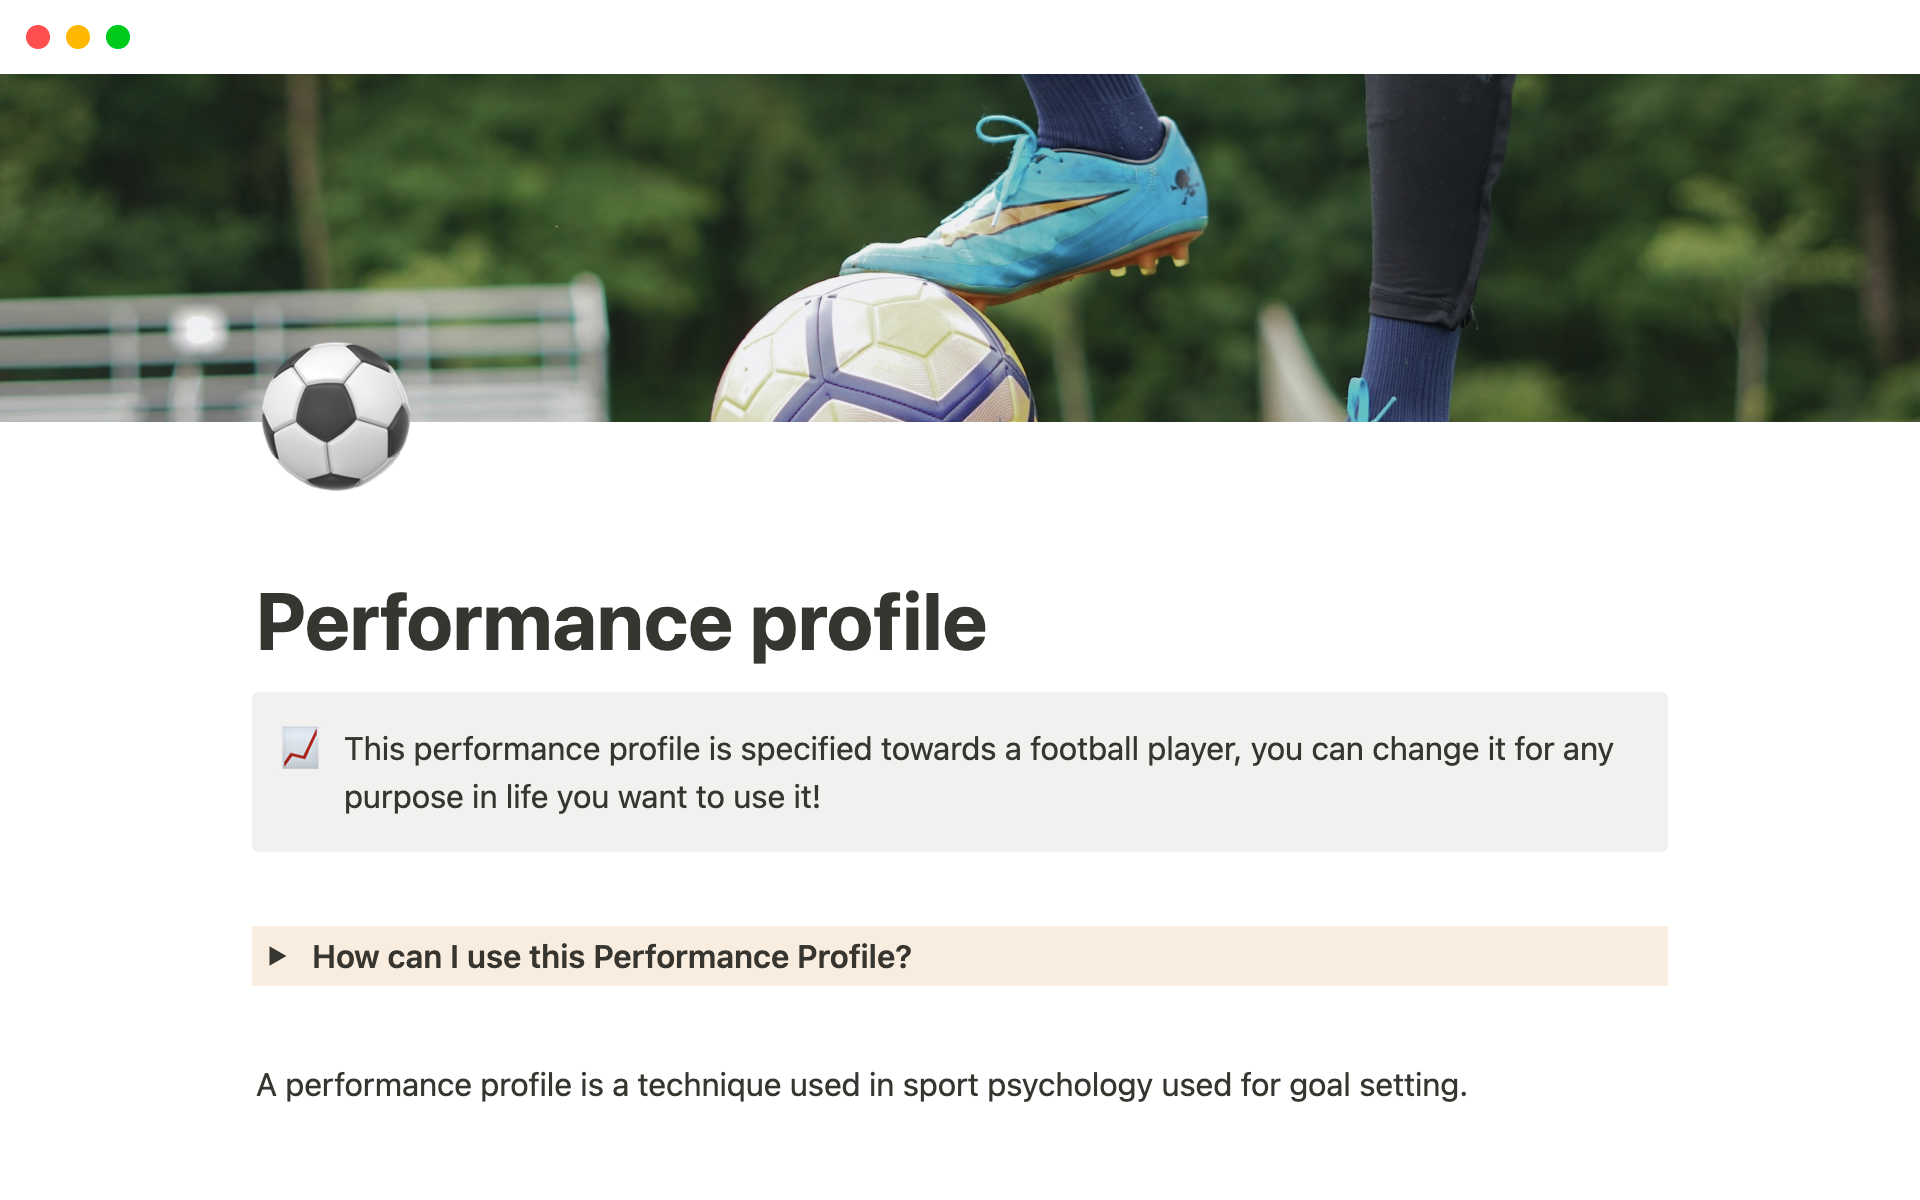 It is a Performance Profile, that is a goal setting technique used in sport psychology